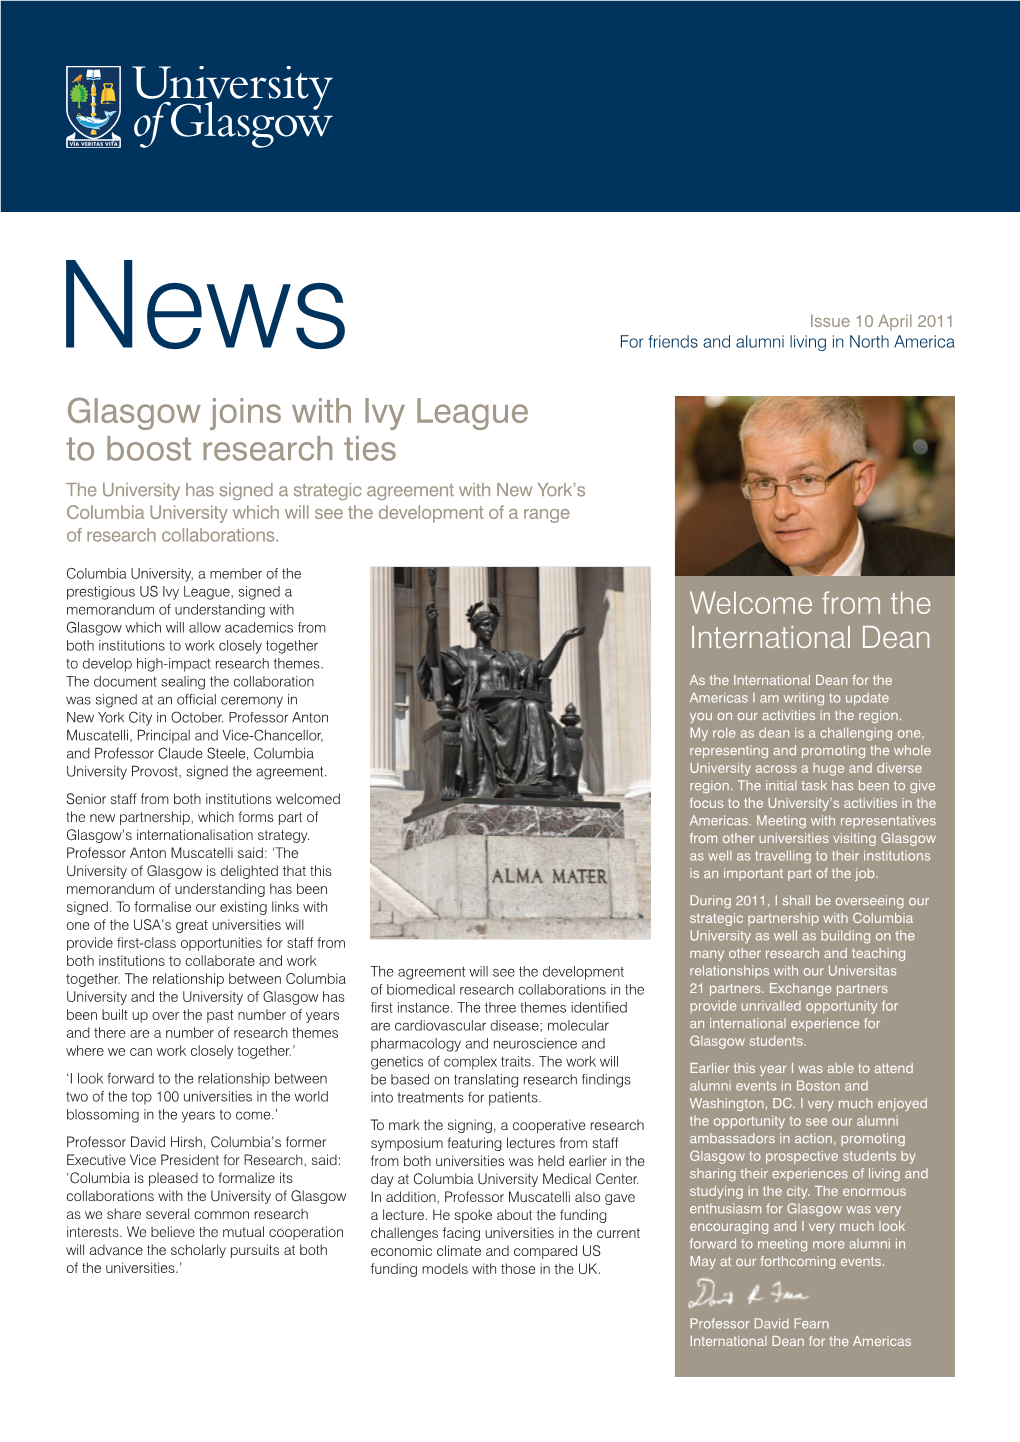 Glasgow Joins with Ivy League to Boost Research Ties